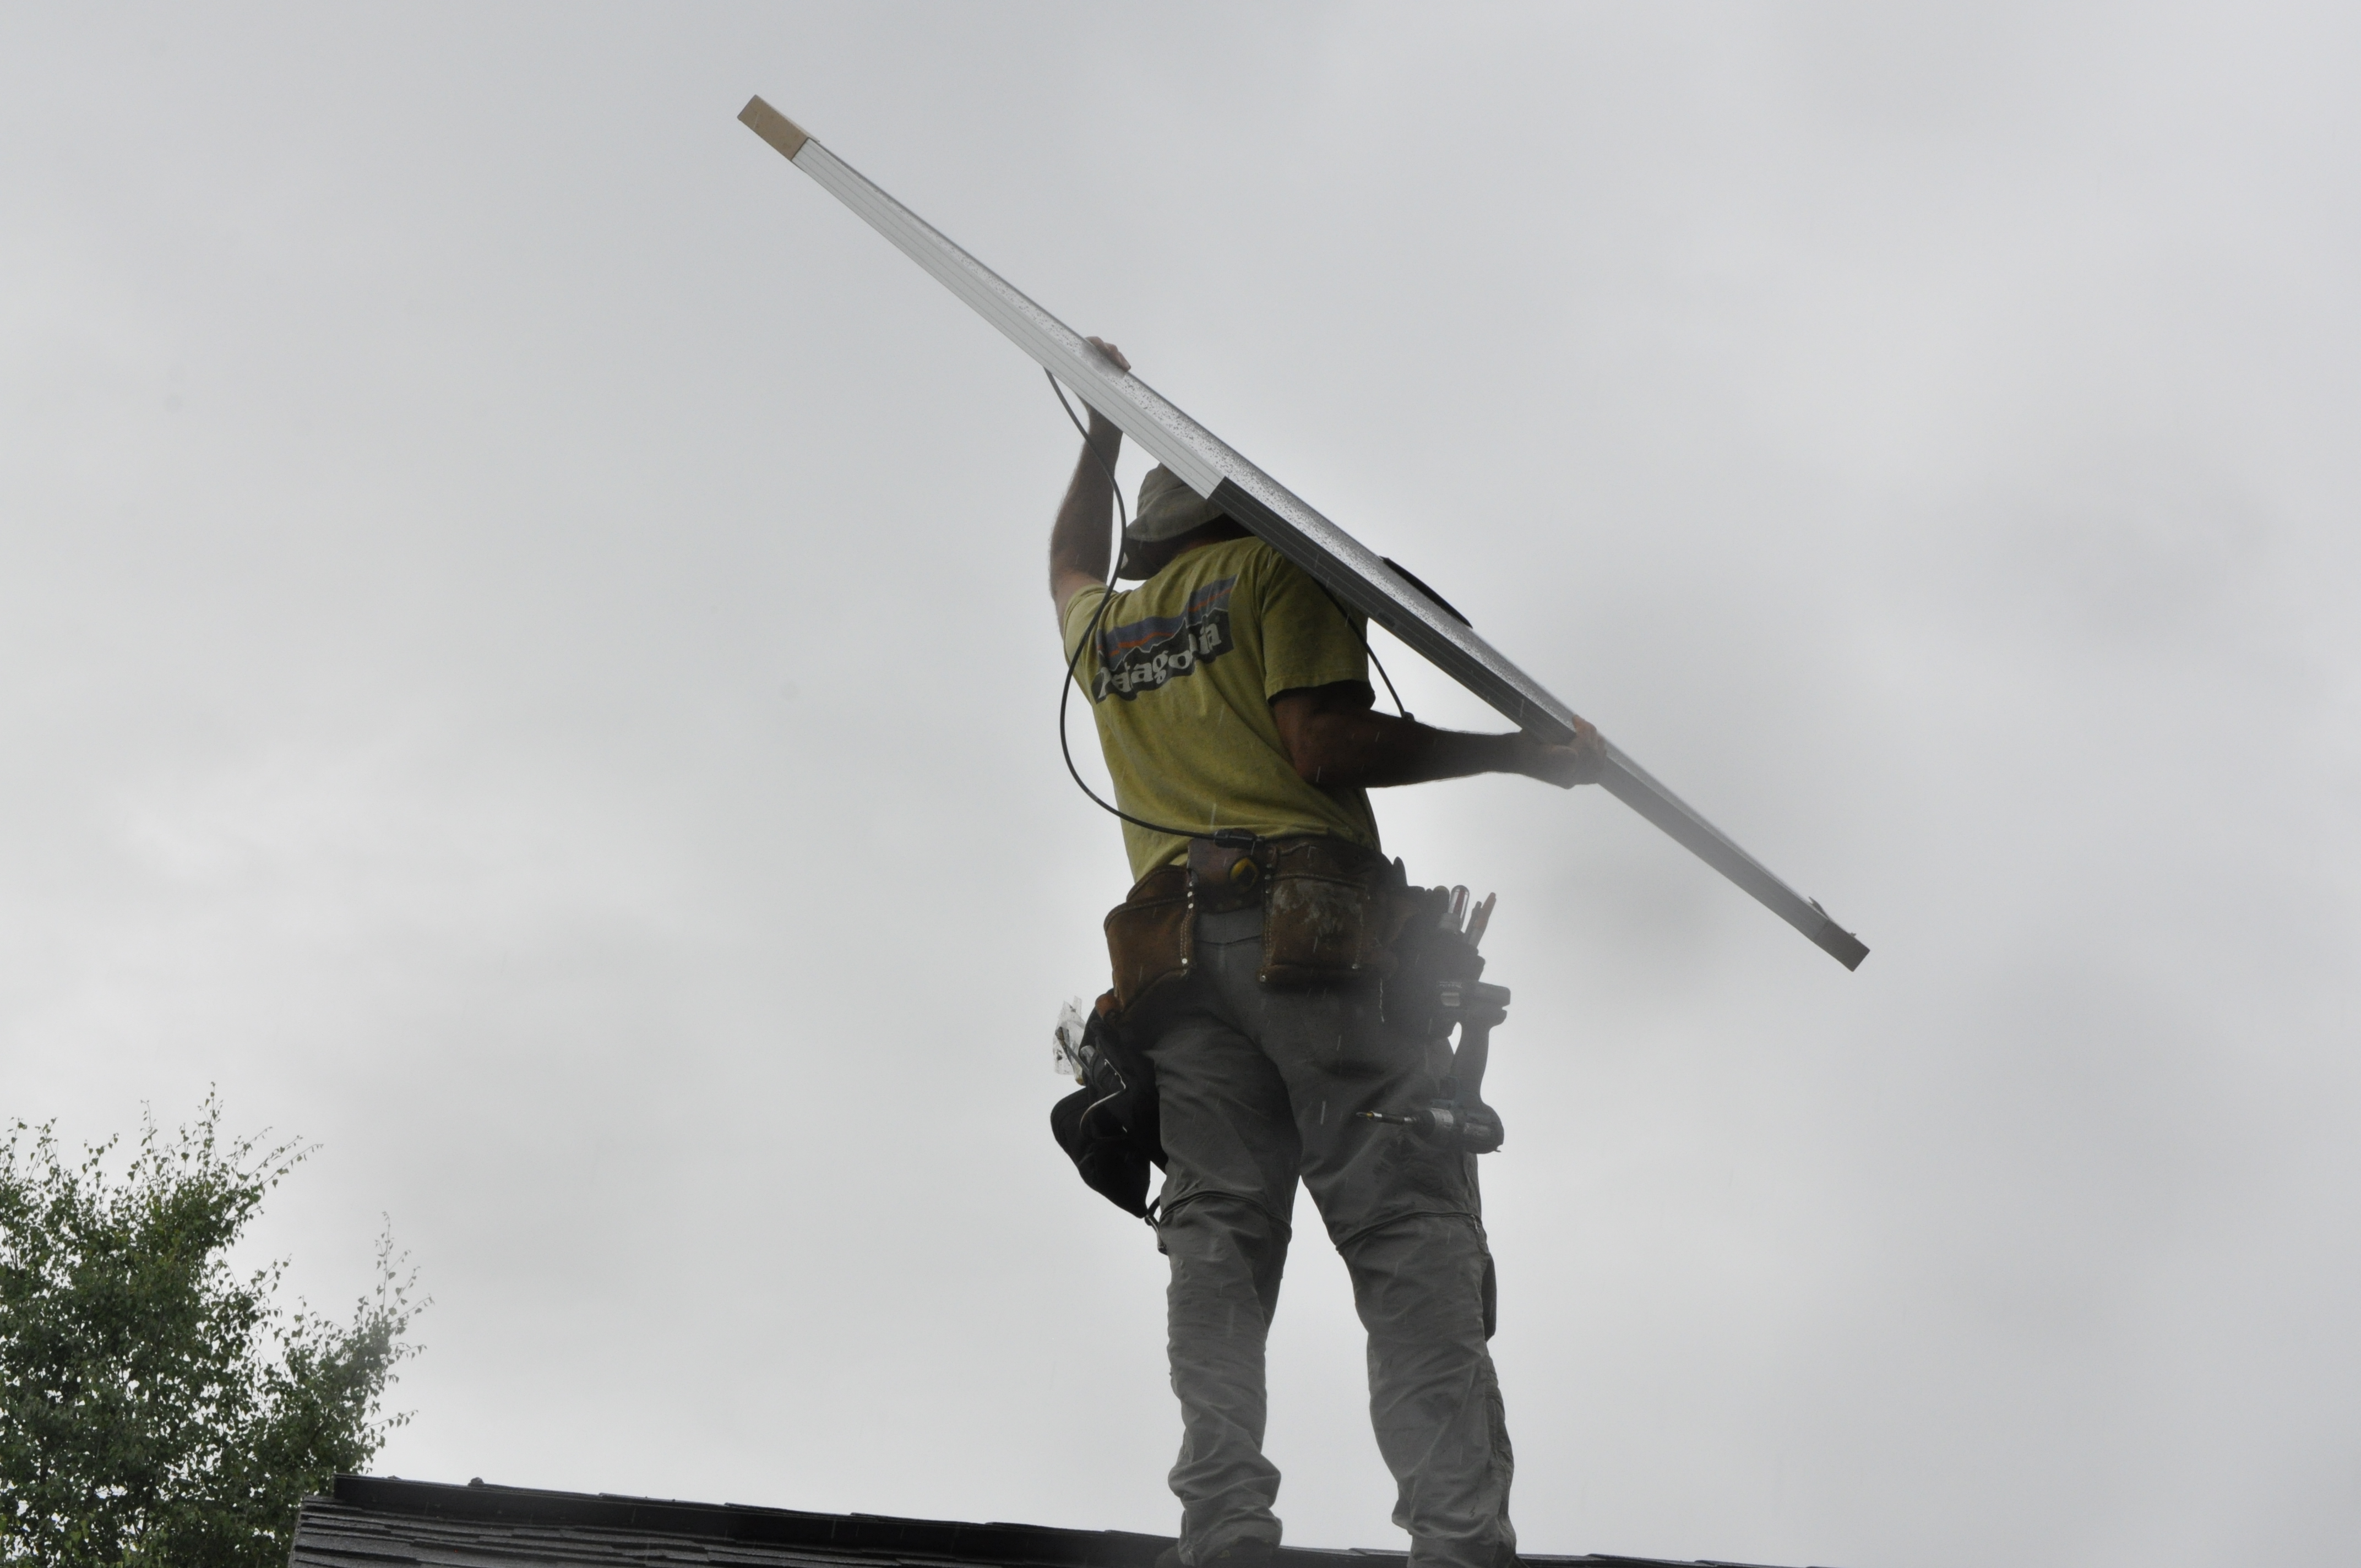 Anchorage Solar employee Tim Remick hoists a solar panel over his head before installing it on Solarize Anchorage participant Lisa Pekar’s roof. The program saved participants around 10 percent on solar panel installations. (Photo by Erin McKinstry, Alaska Public Media)